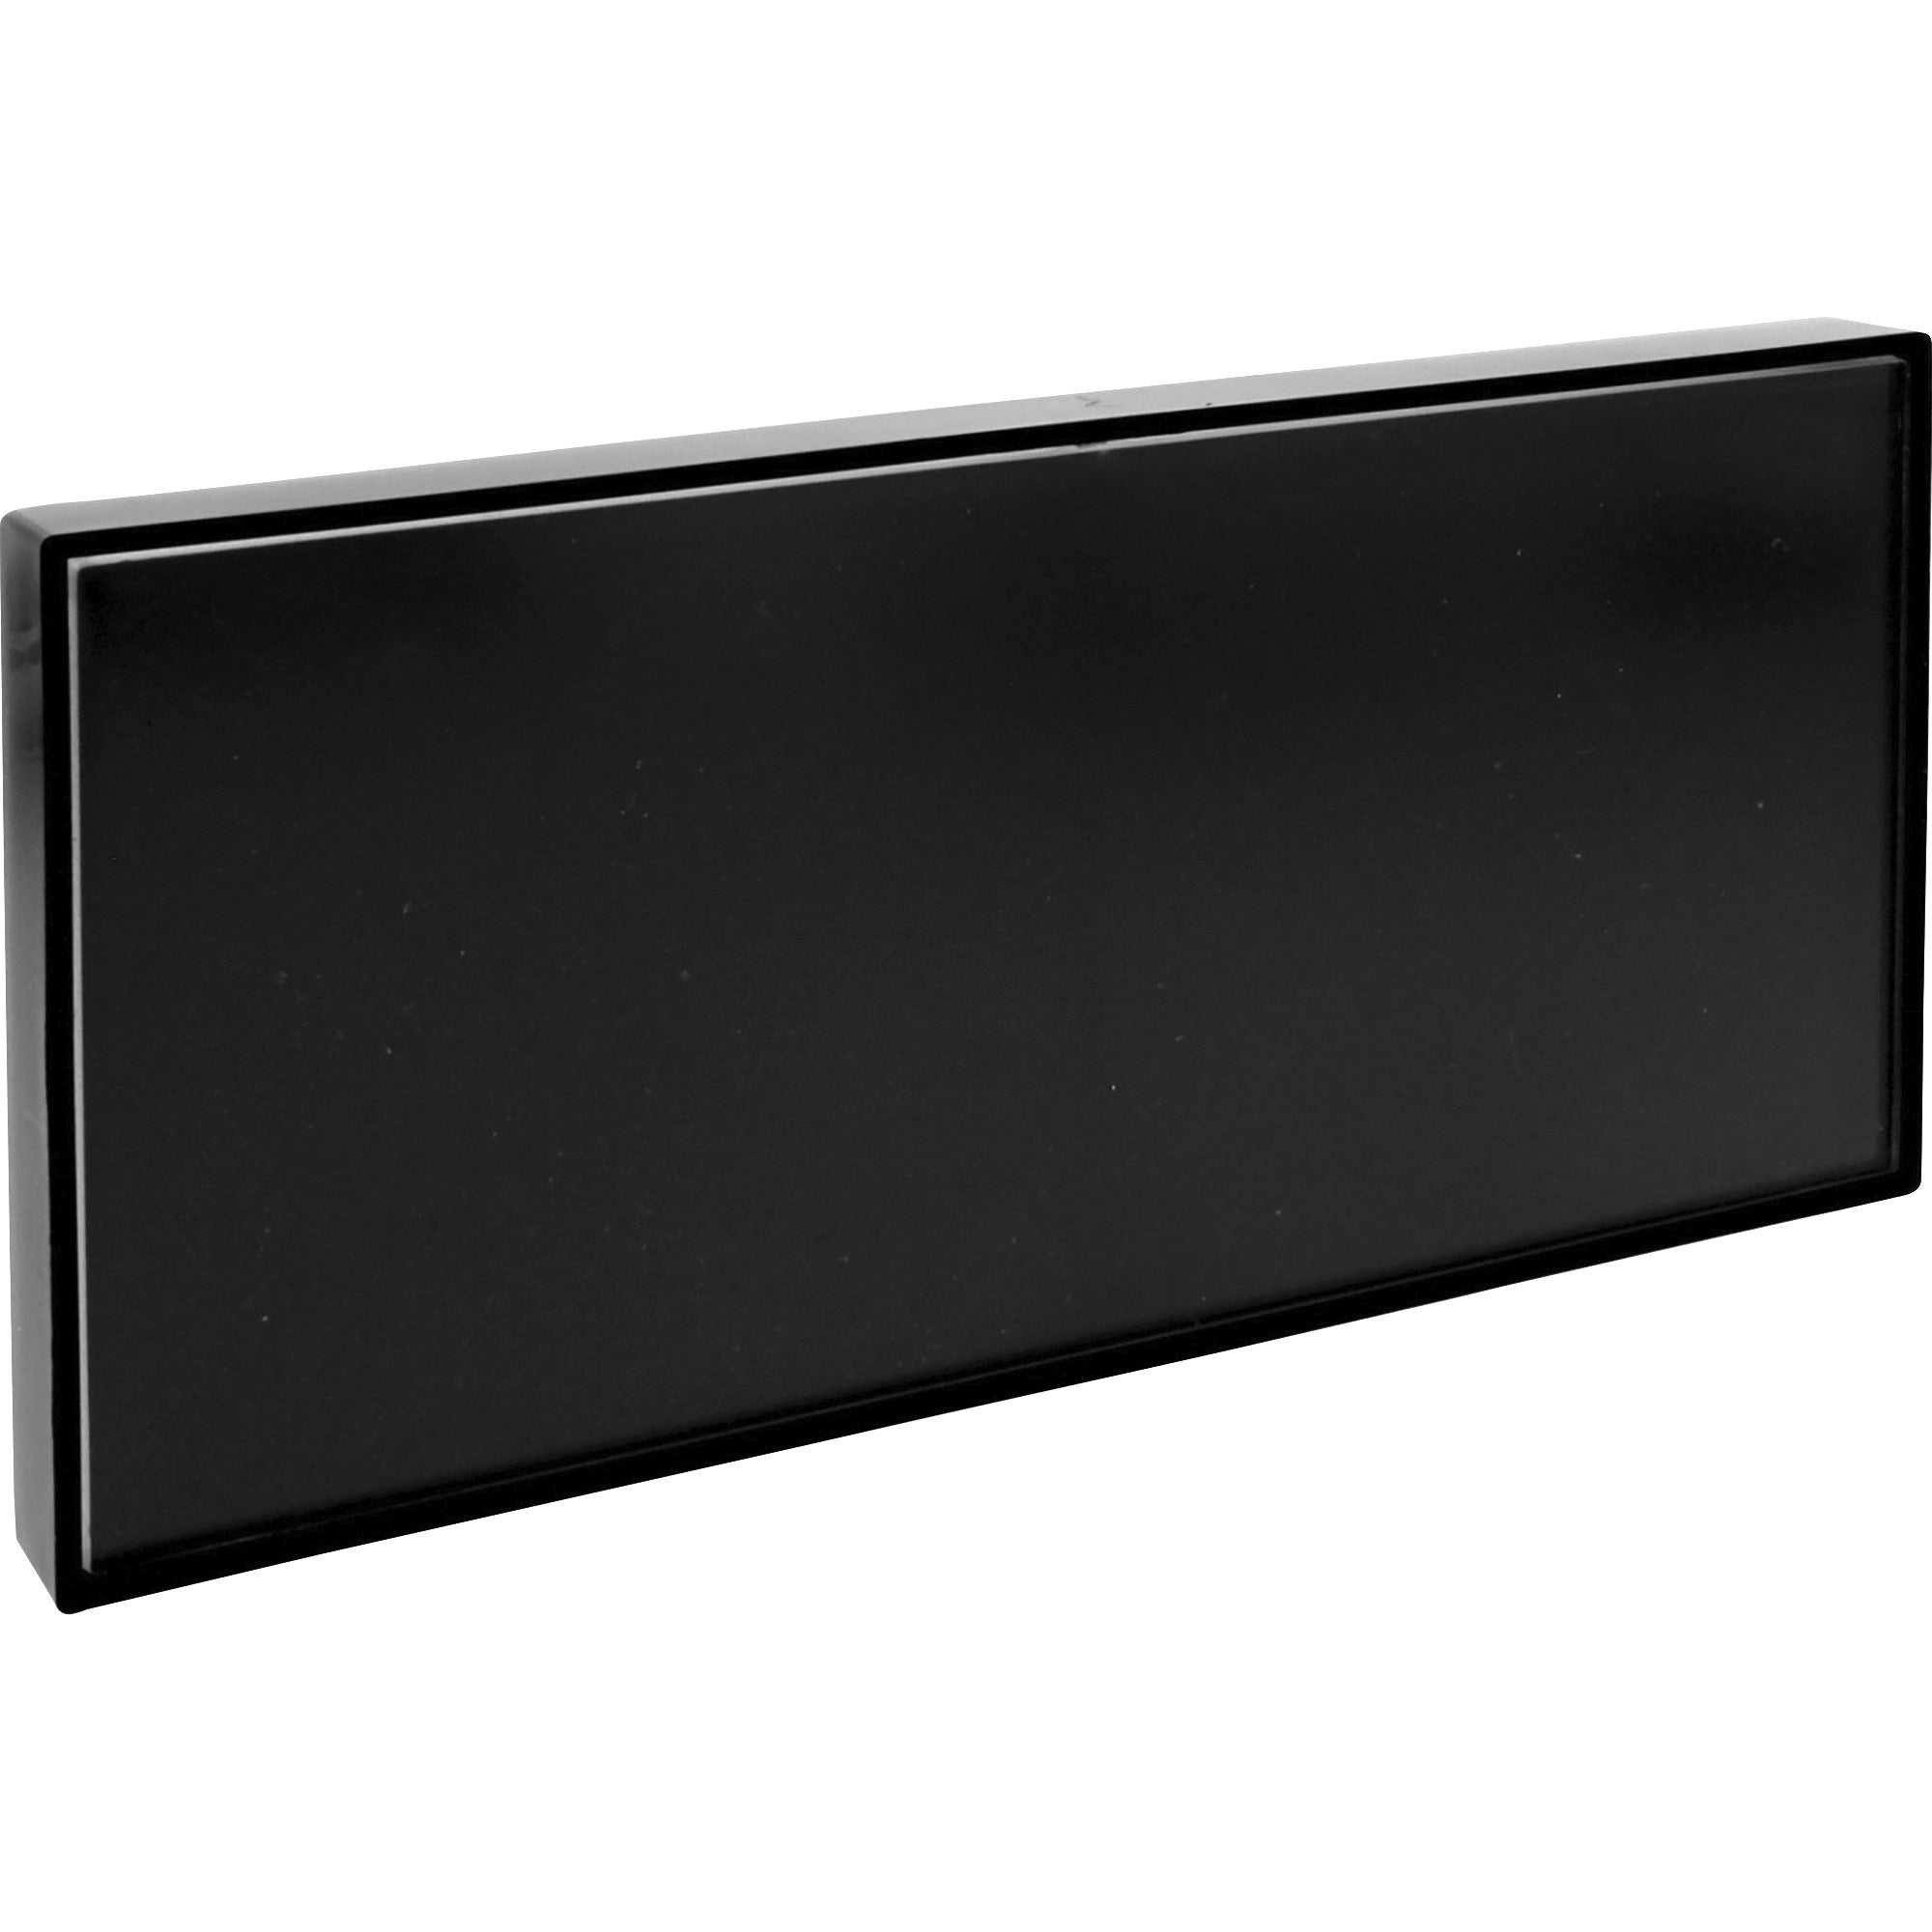 lorell-snap-plate-architectural-sign-1-each-8-width-x-4-height-x-8-depth-rectangular-shape-surface-mountable-easy-readability-injection-molded-easy-to-use-plastic-black_llr02648 - 1